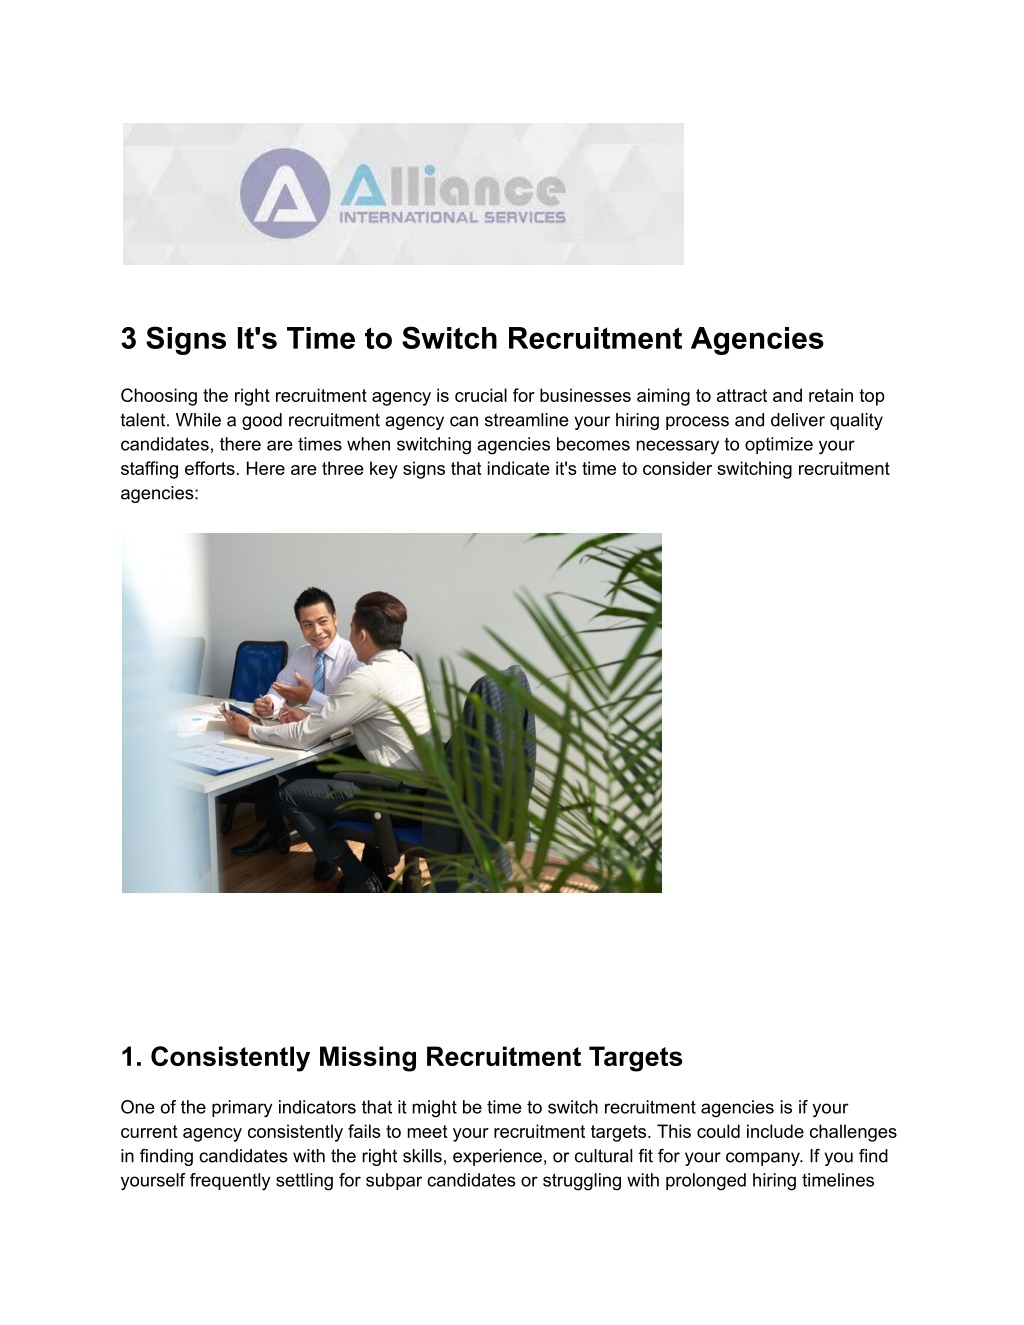 3 signs it s time to switch recruitment agencies l.w